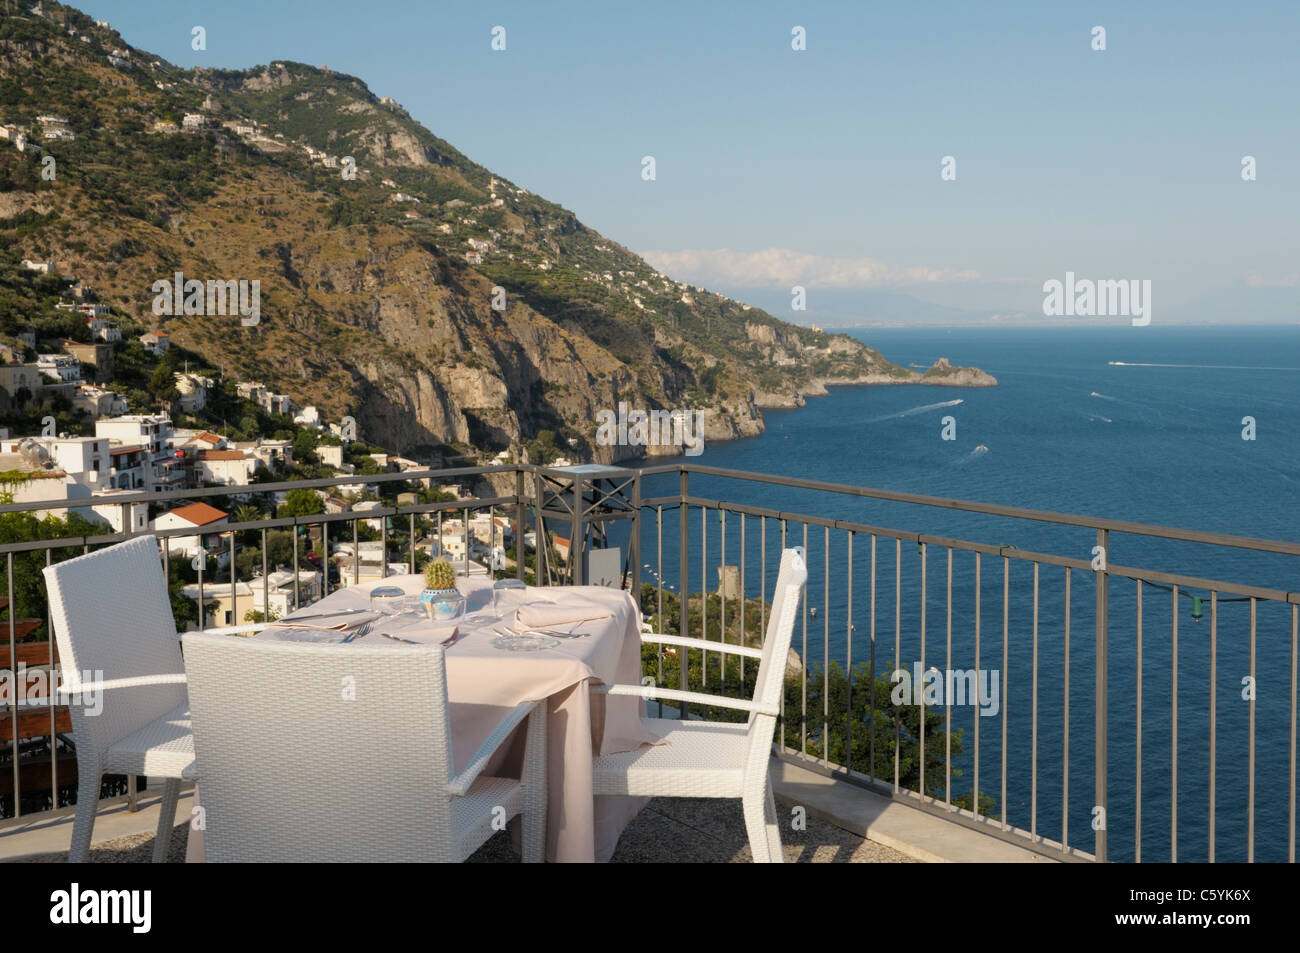 View from a restaurant terrace in Praiano, Amalfi Coast, Italy.  The Hotel Margherita restaurant. Stock Photo